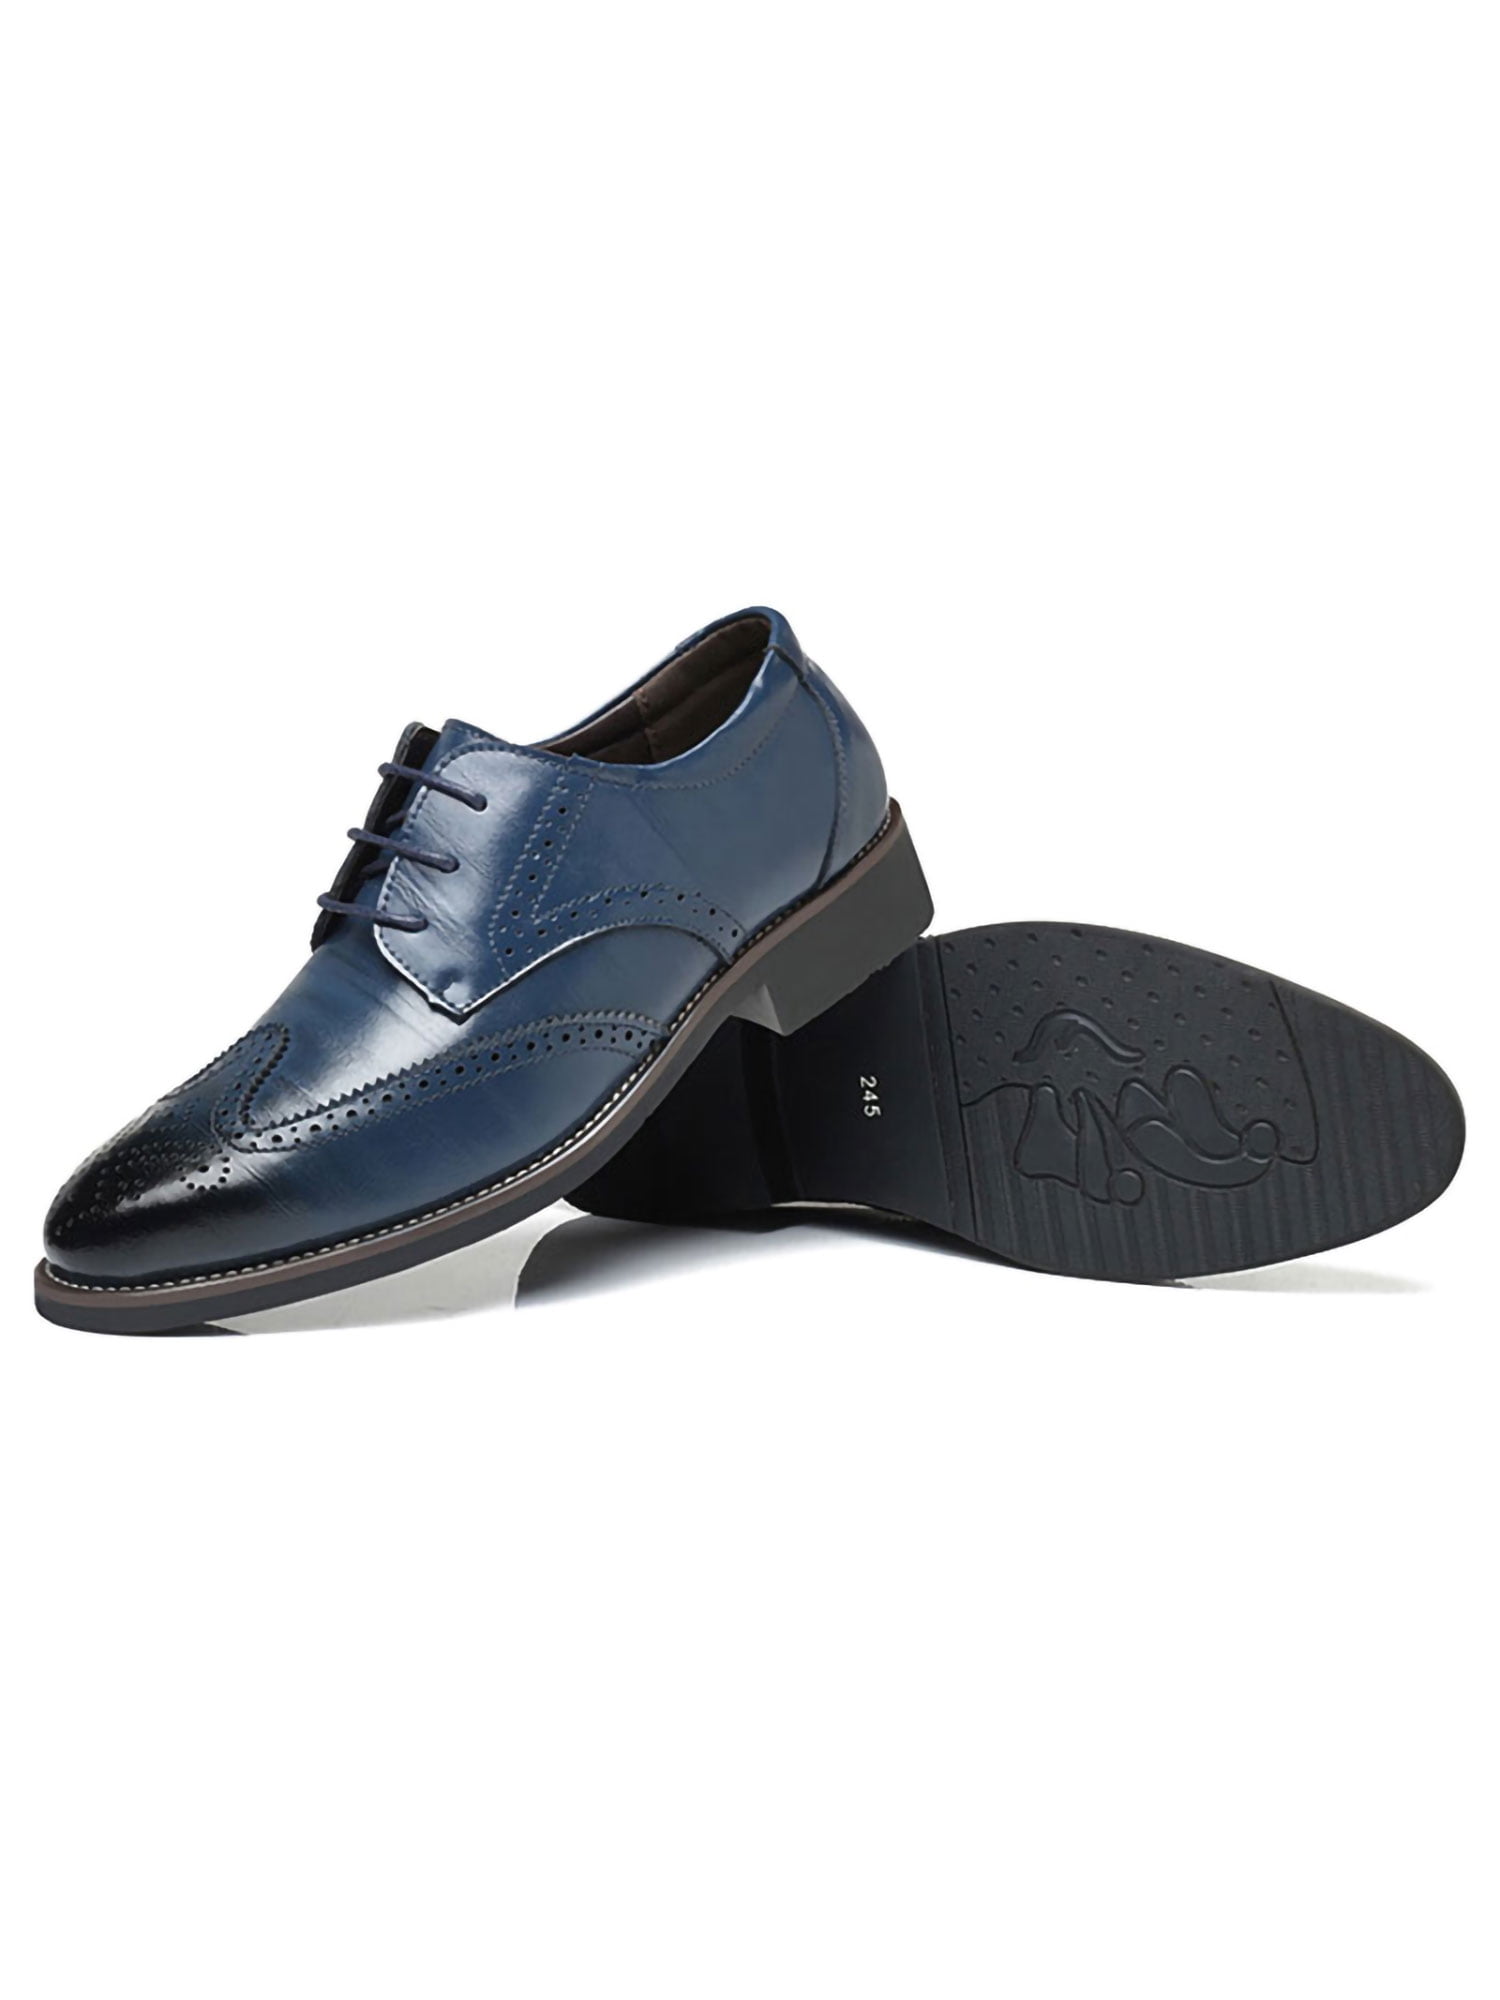 Details about   Mens Low Top Leather Shoes Business Work Pointy Toe Oxfords Wedding Wing Tip New 